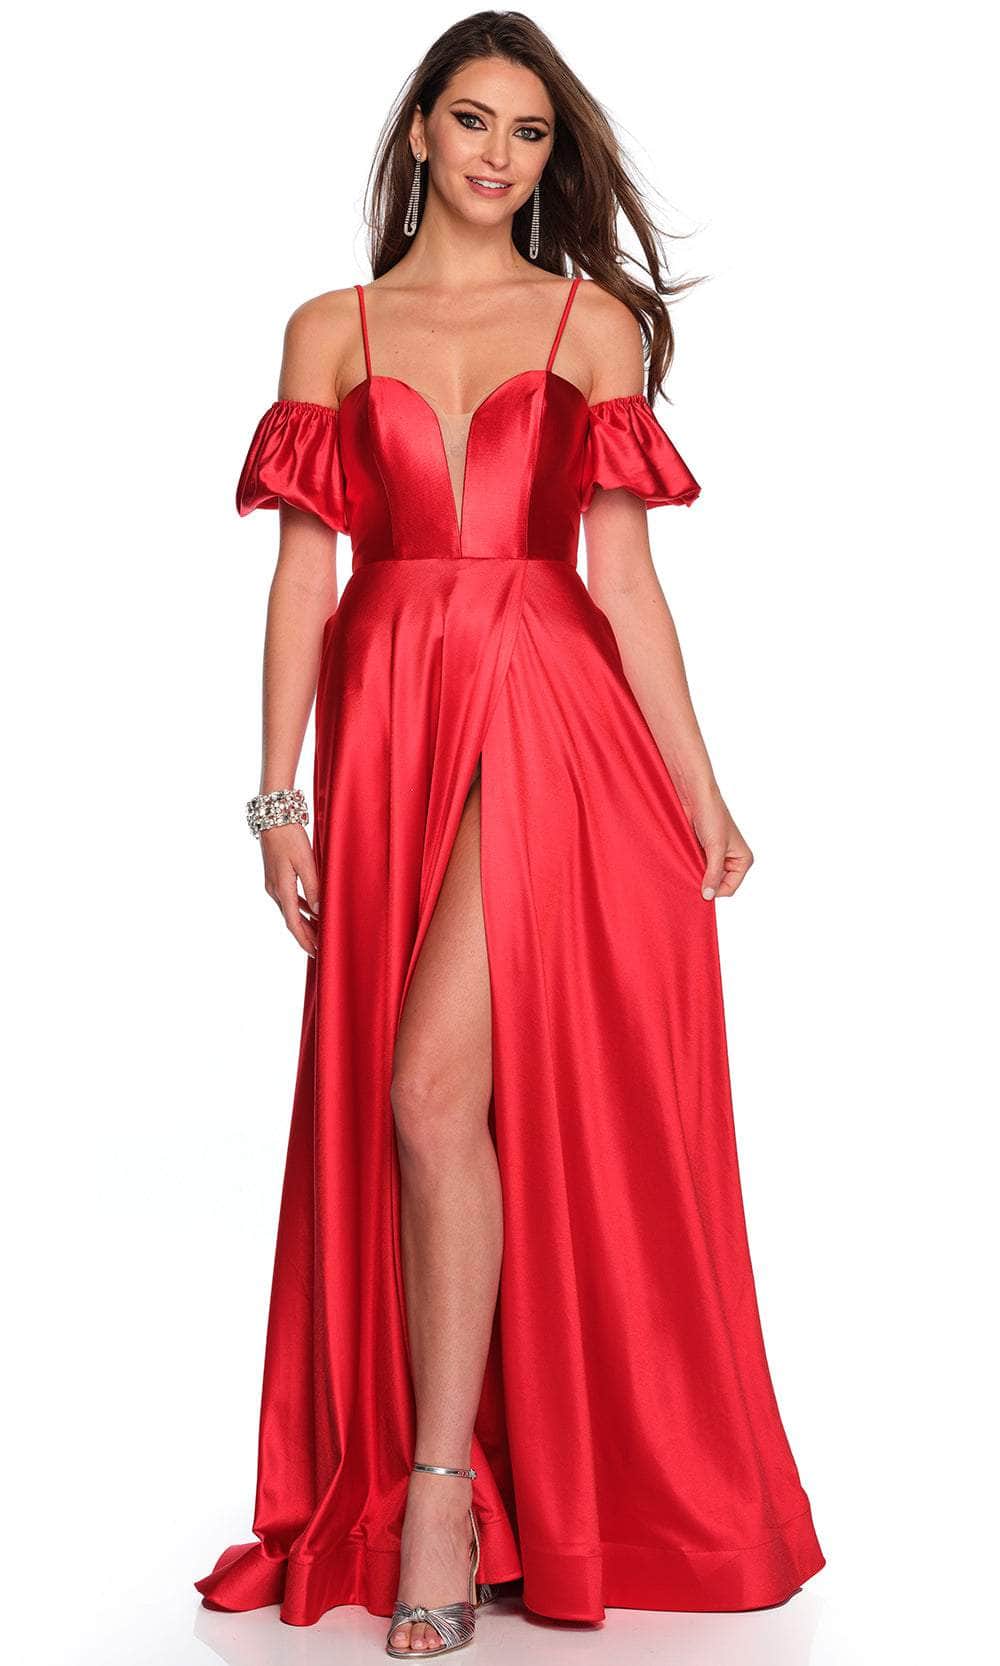 Image of Dave & Johnny 11228 - Plunging Sweetheart Satin Prom Gown